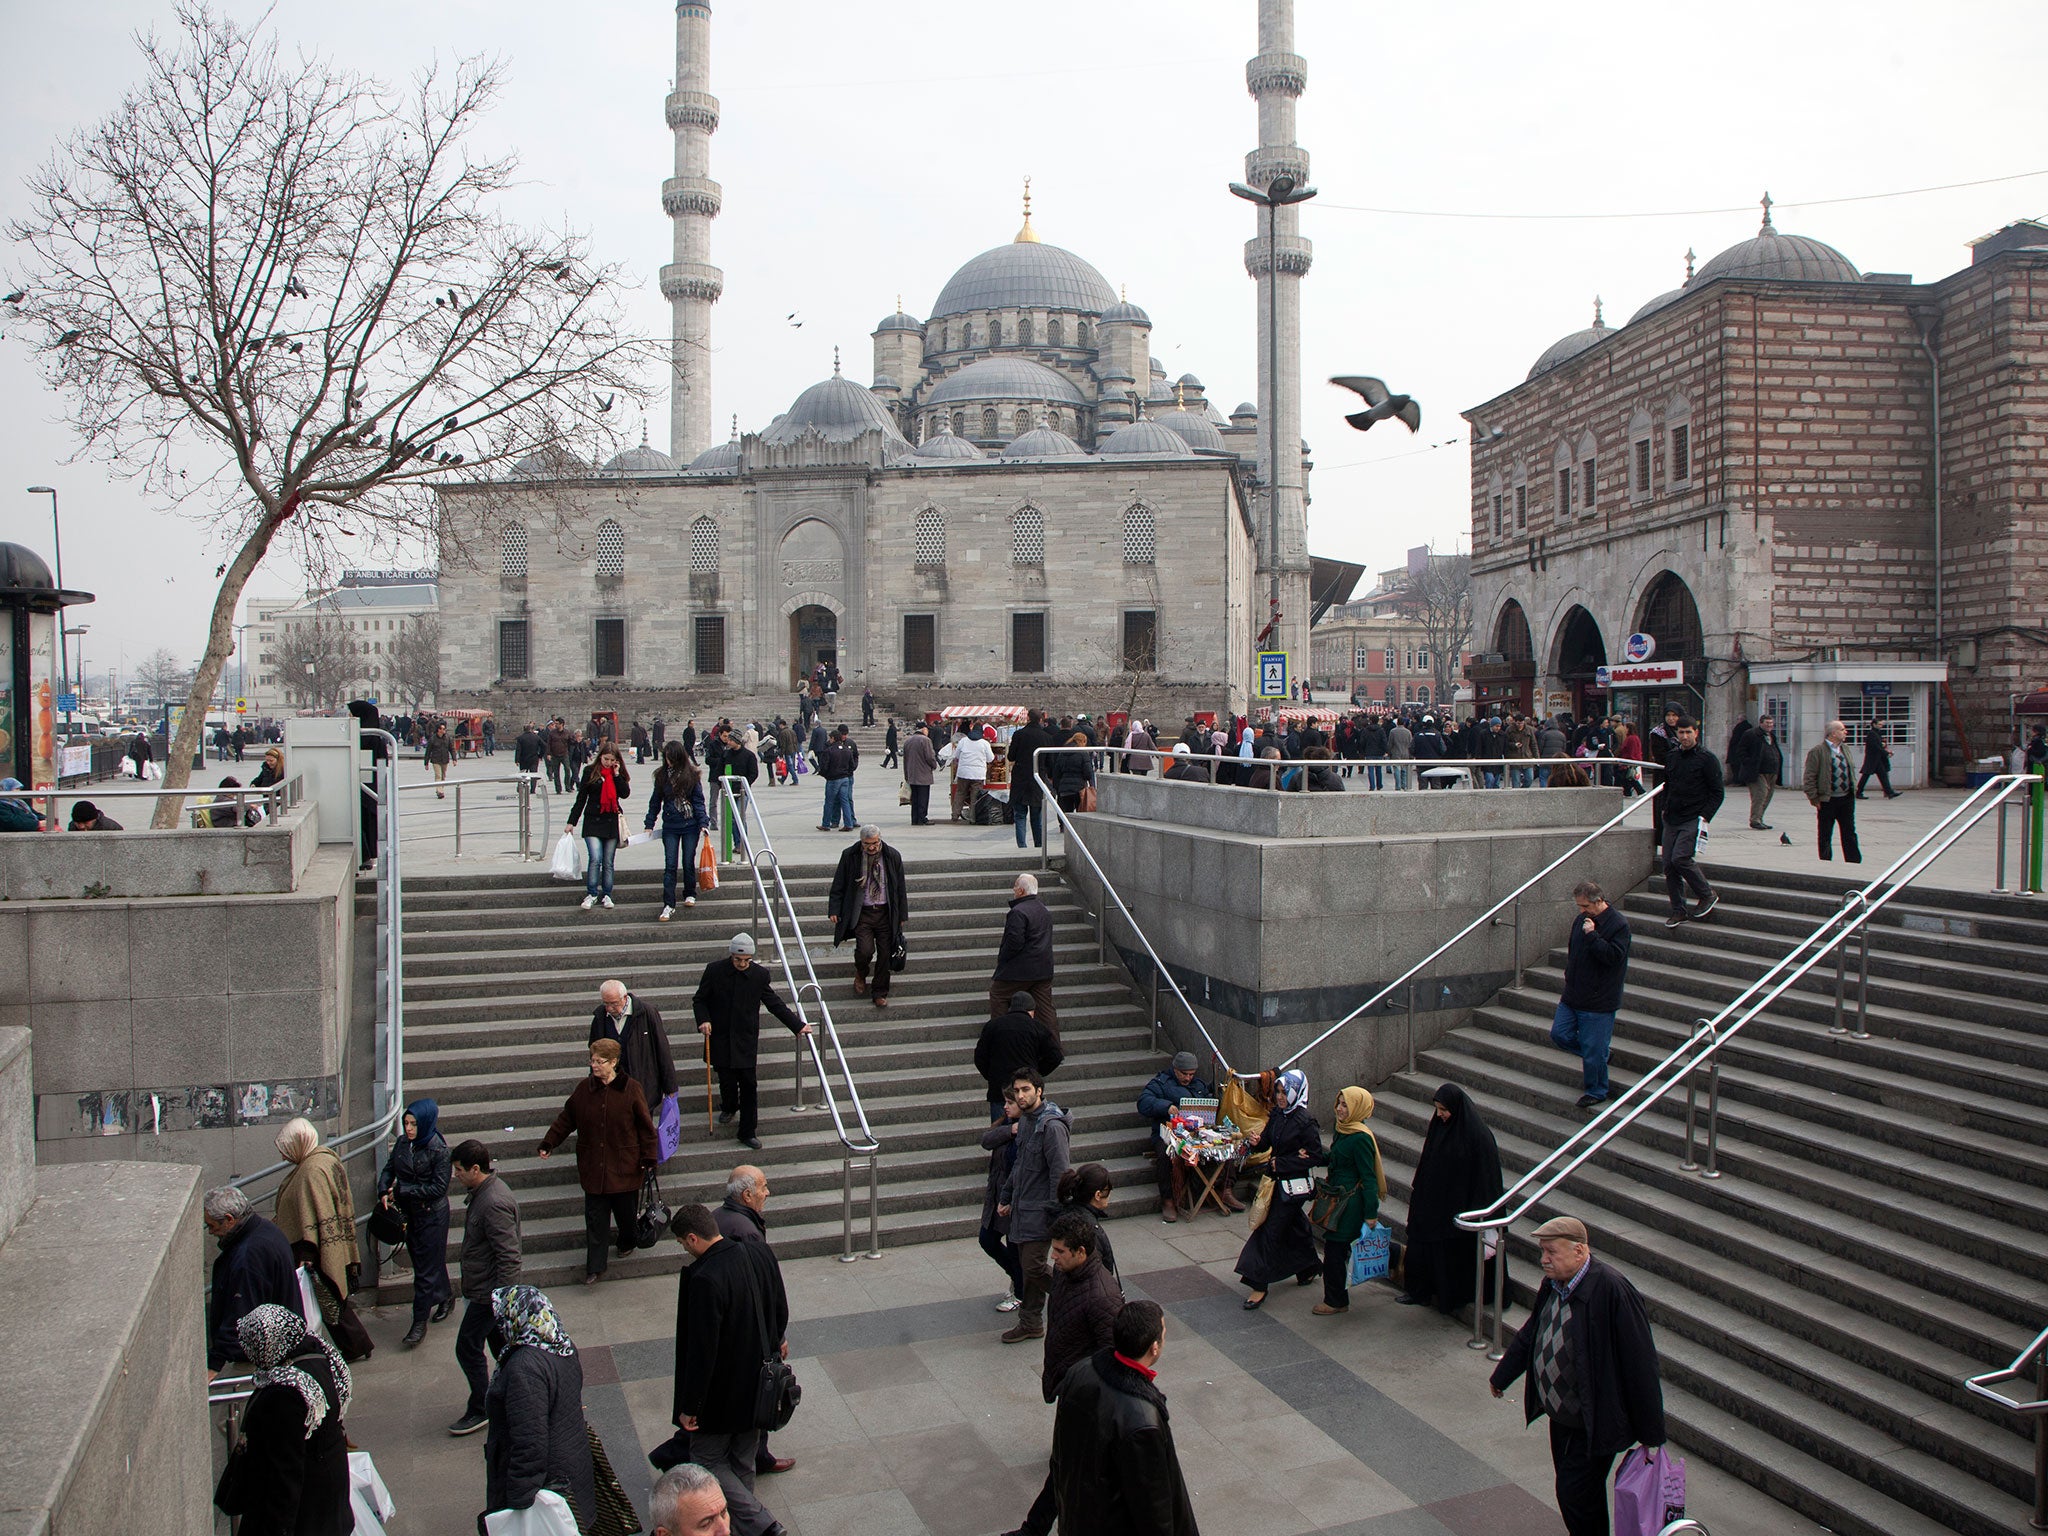 Commuters make their way into Istanbul's underground, with the New Mosque in the background